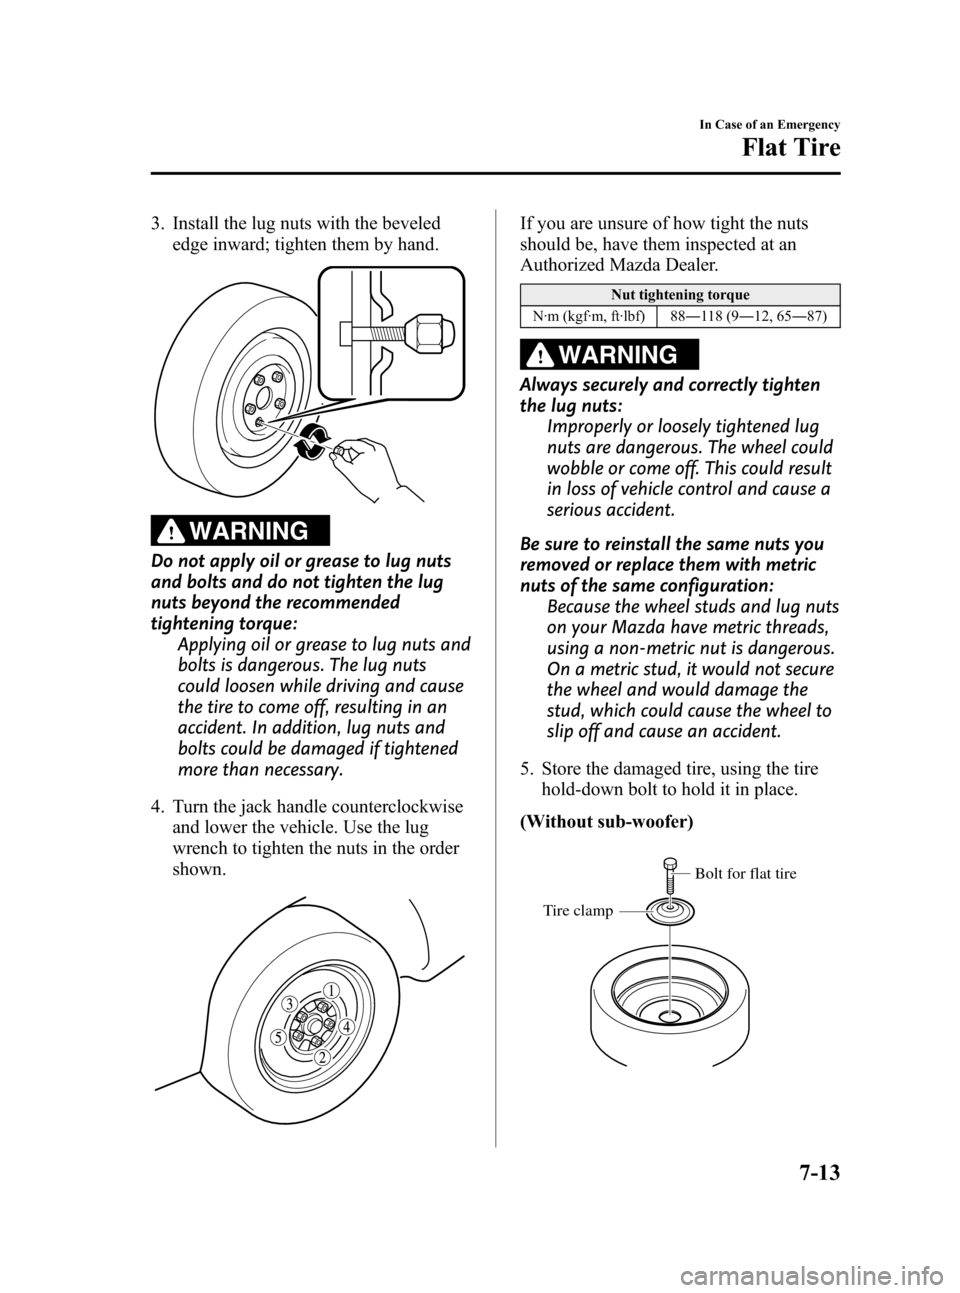 MAZDA MODEL 3 HATCHBACK 2011  Owners Manual (in English) Black plate (359,1)
3. Install the lug nuts with the bevelededge inward; tighten them by hand.
WARNING
Do not apply oil or grease to lug nuts
and bolts and do not tighten the lug
nuts beyond the recom